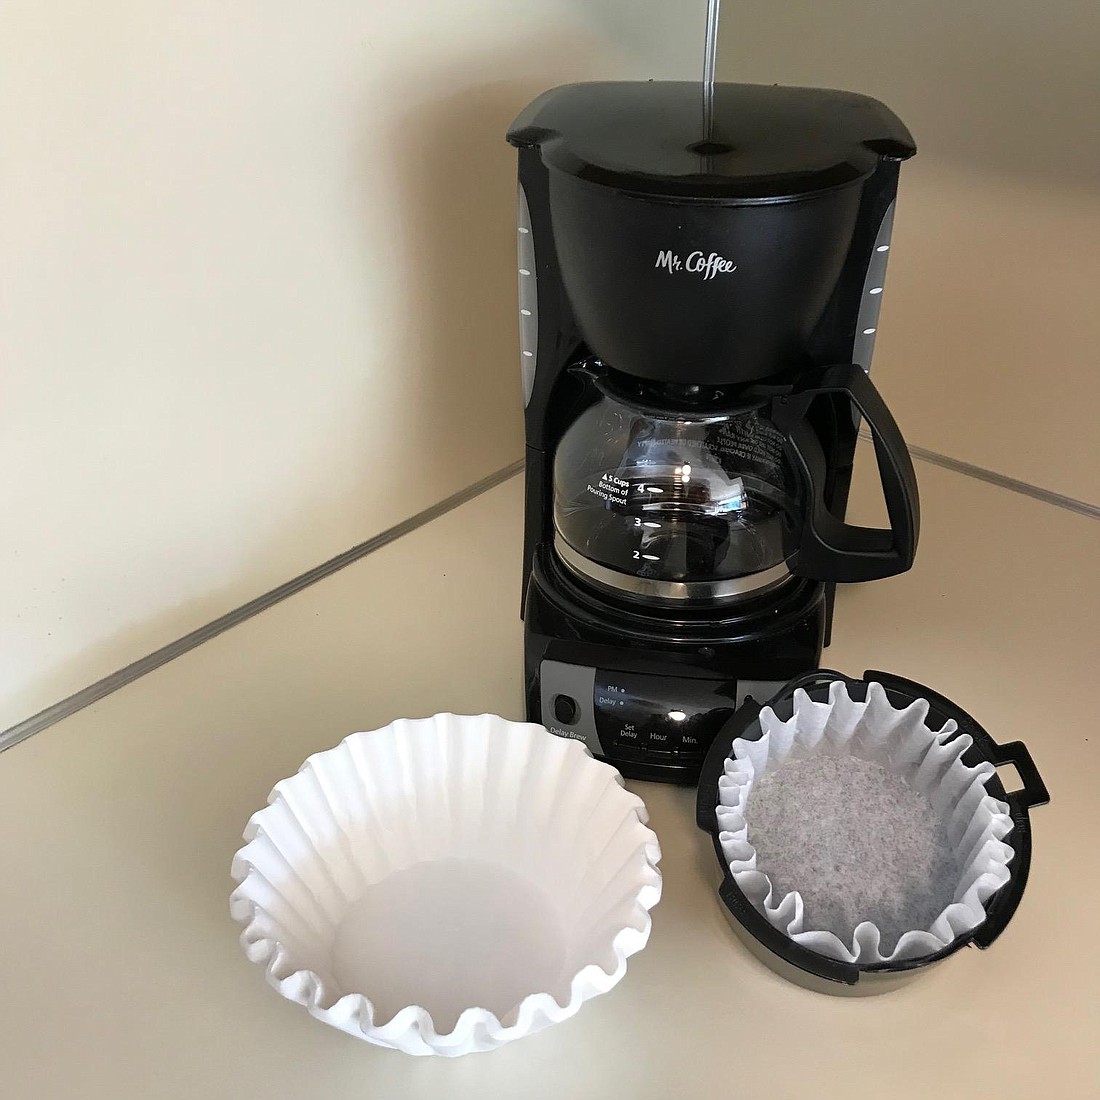 Coffee pot and filters